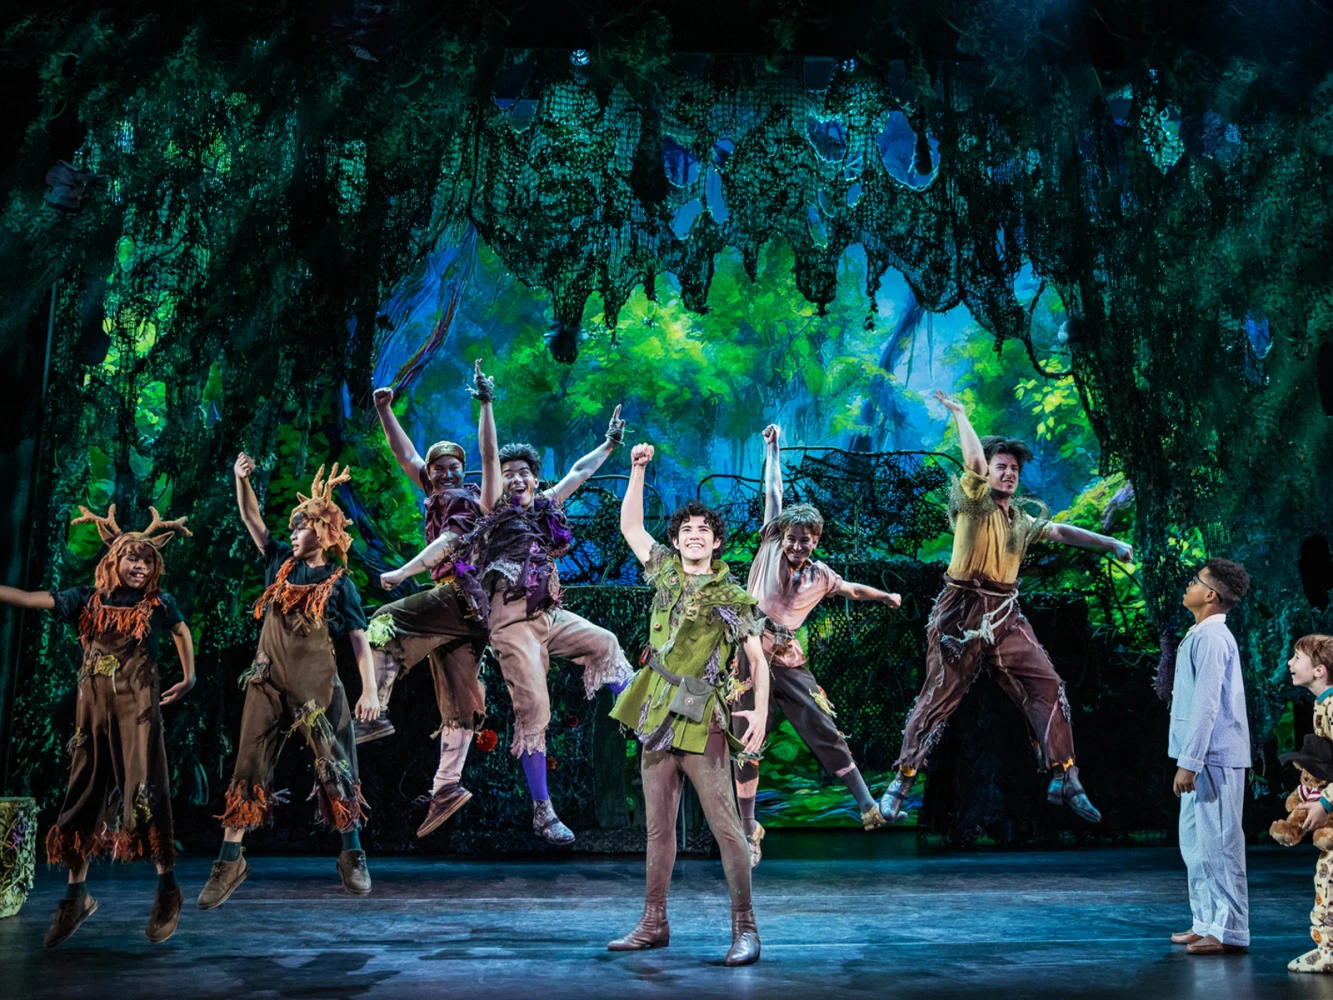 Peter Pan at Segerstrom: What to expect - 3